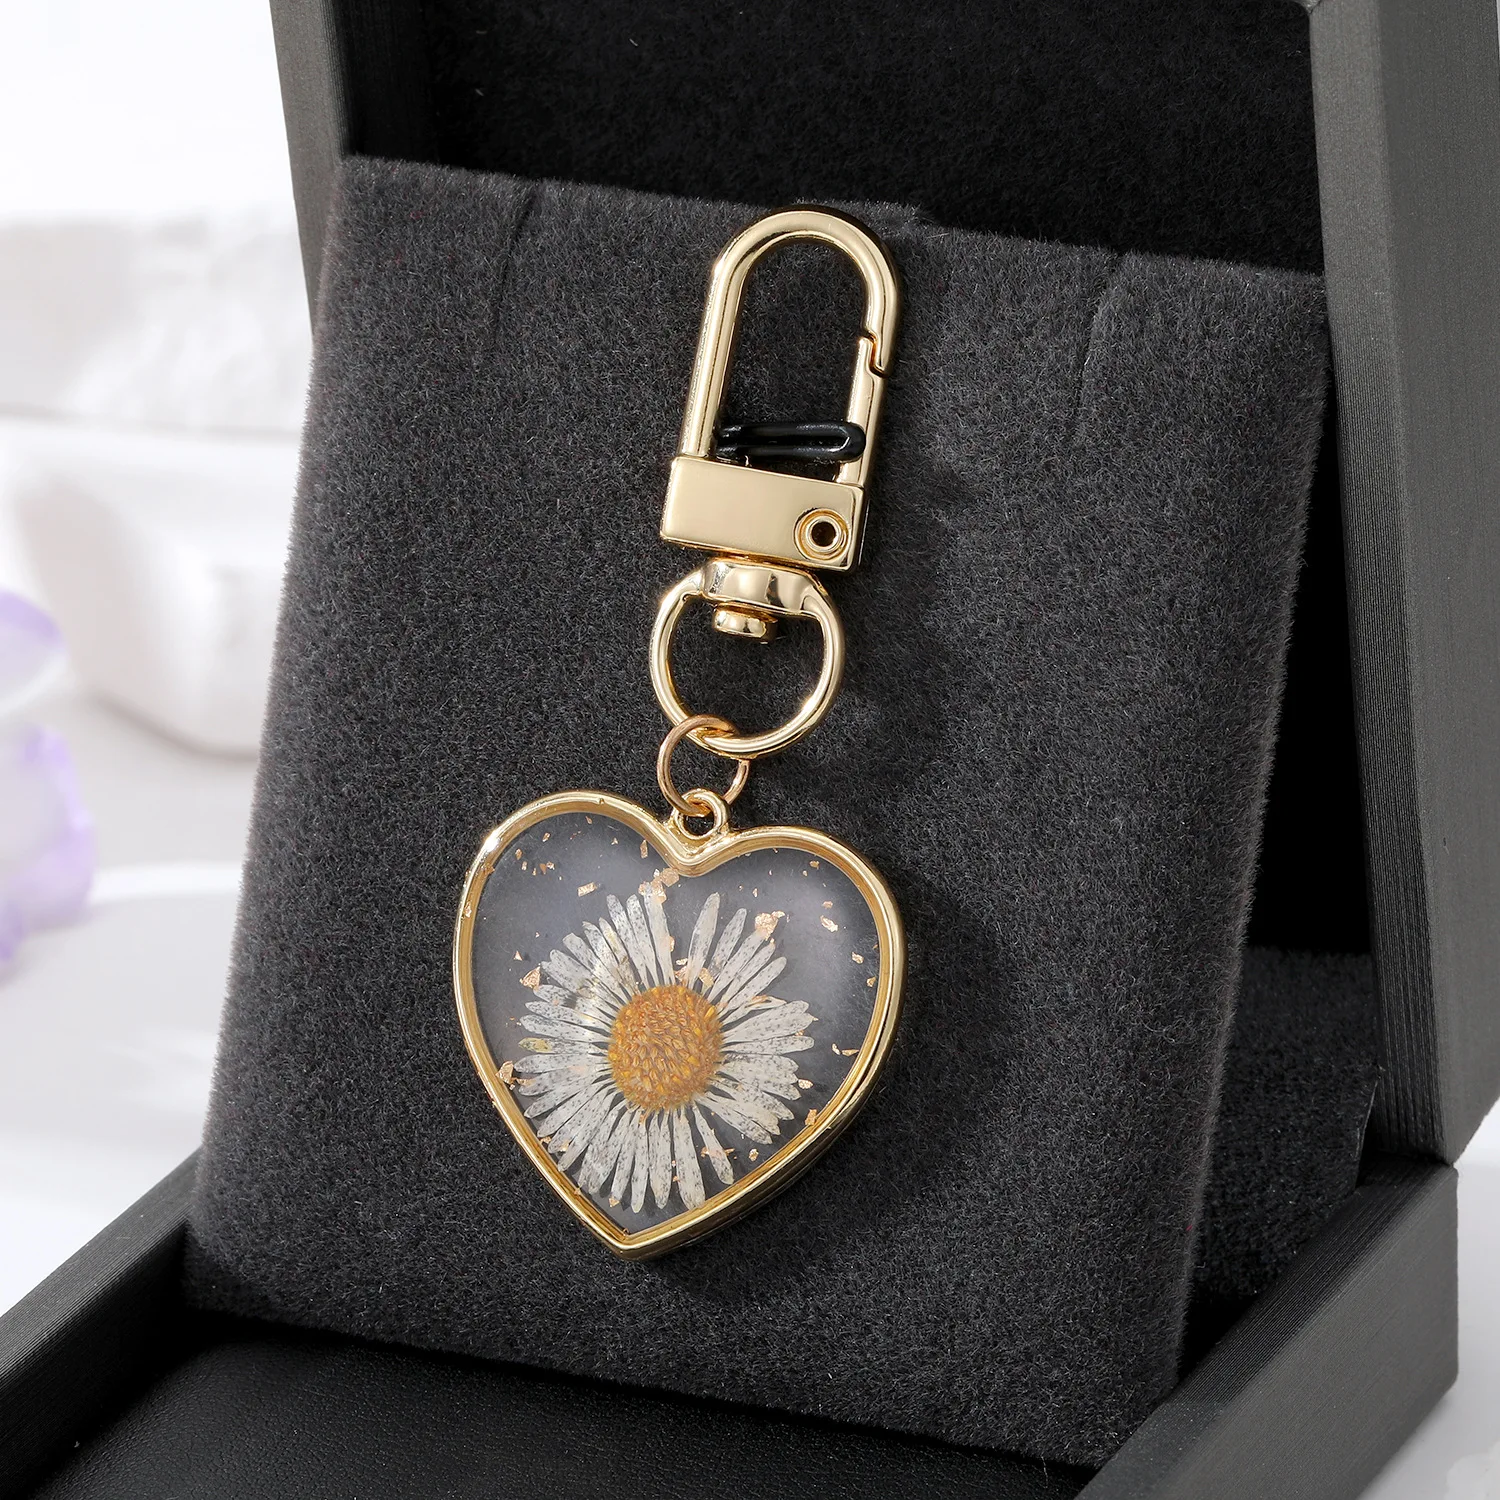 

Heart Clear Real Dried Flower Resin Daisy Petal Pendant Metal Key Chain Rotationable Clasp Keyring Key Holder Party Gift Jewelry